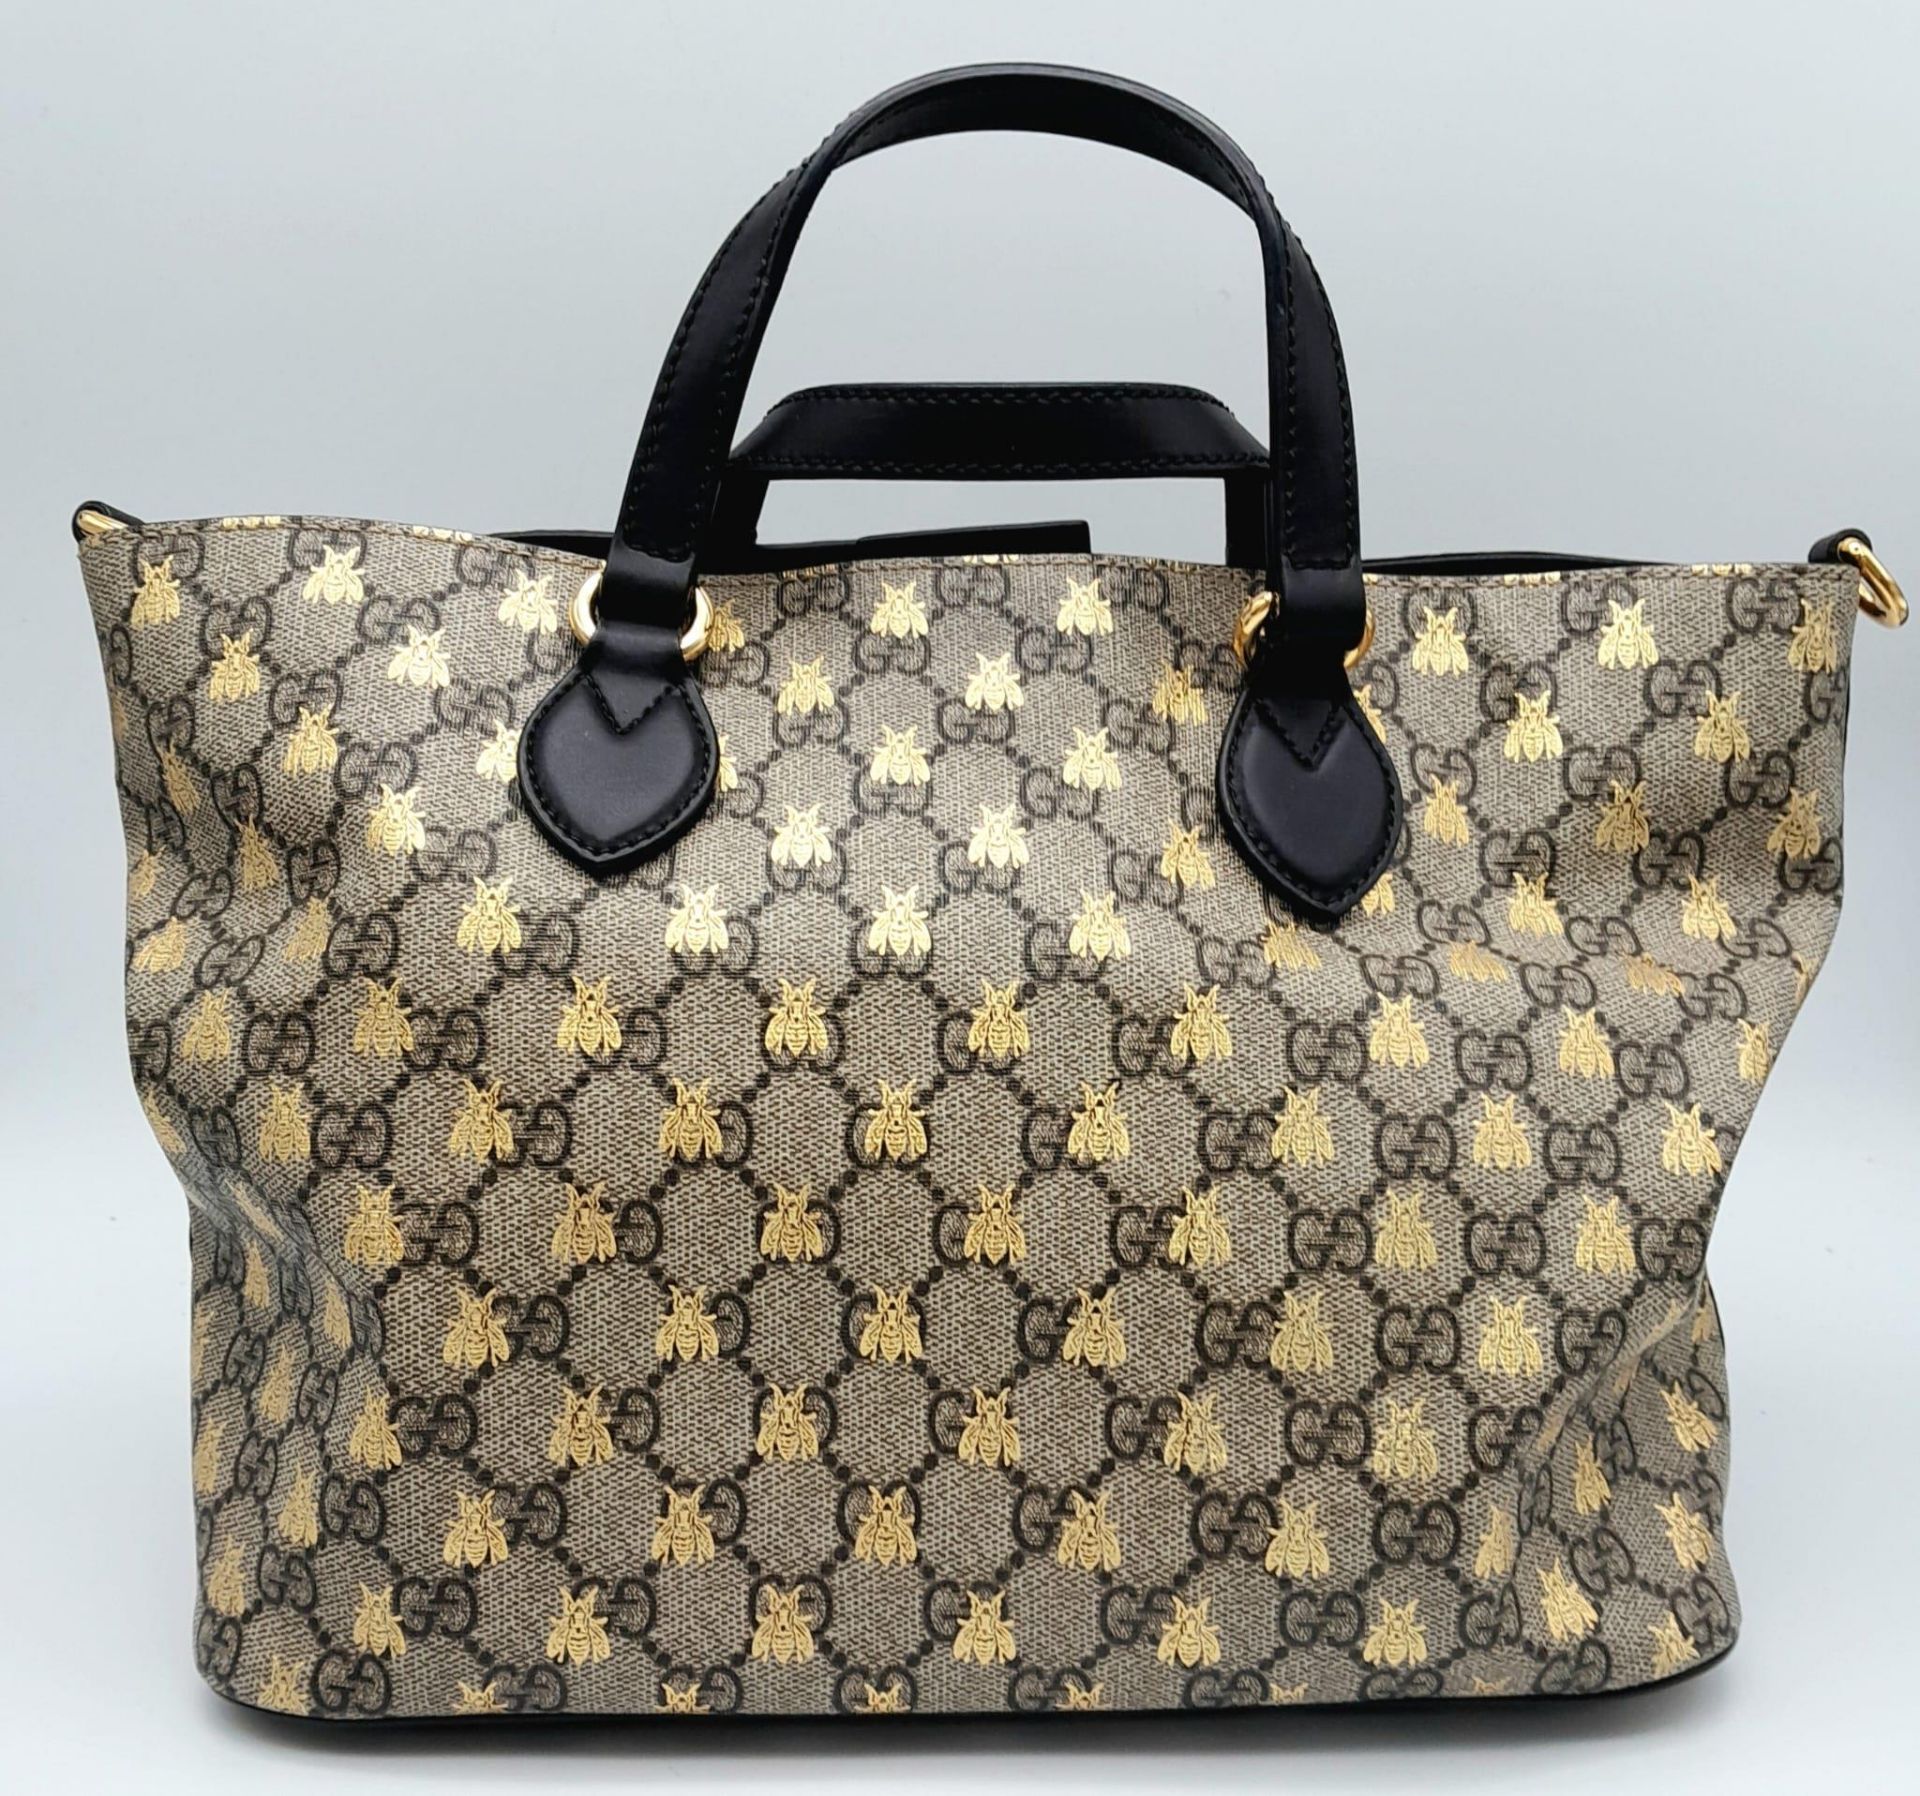 GUCCI GG Supreme Bee Satchel, This satchel features a coated canvas body, flat leather handles, a - Image 3 of 8